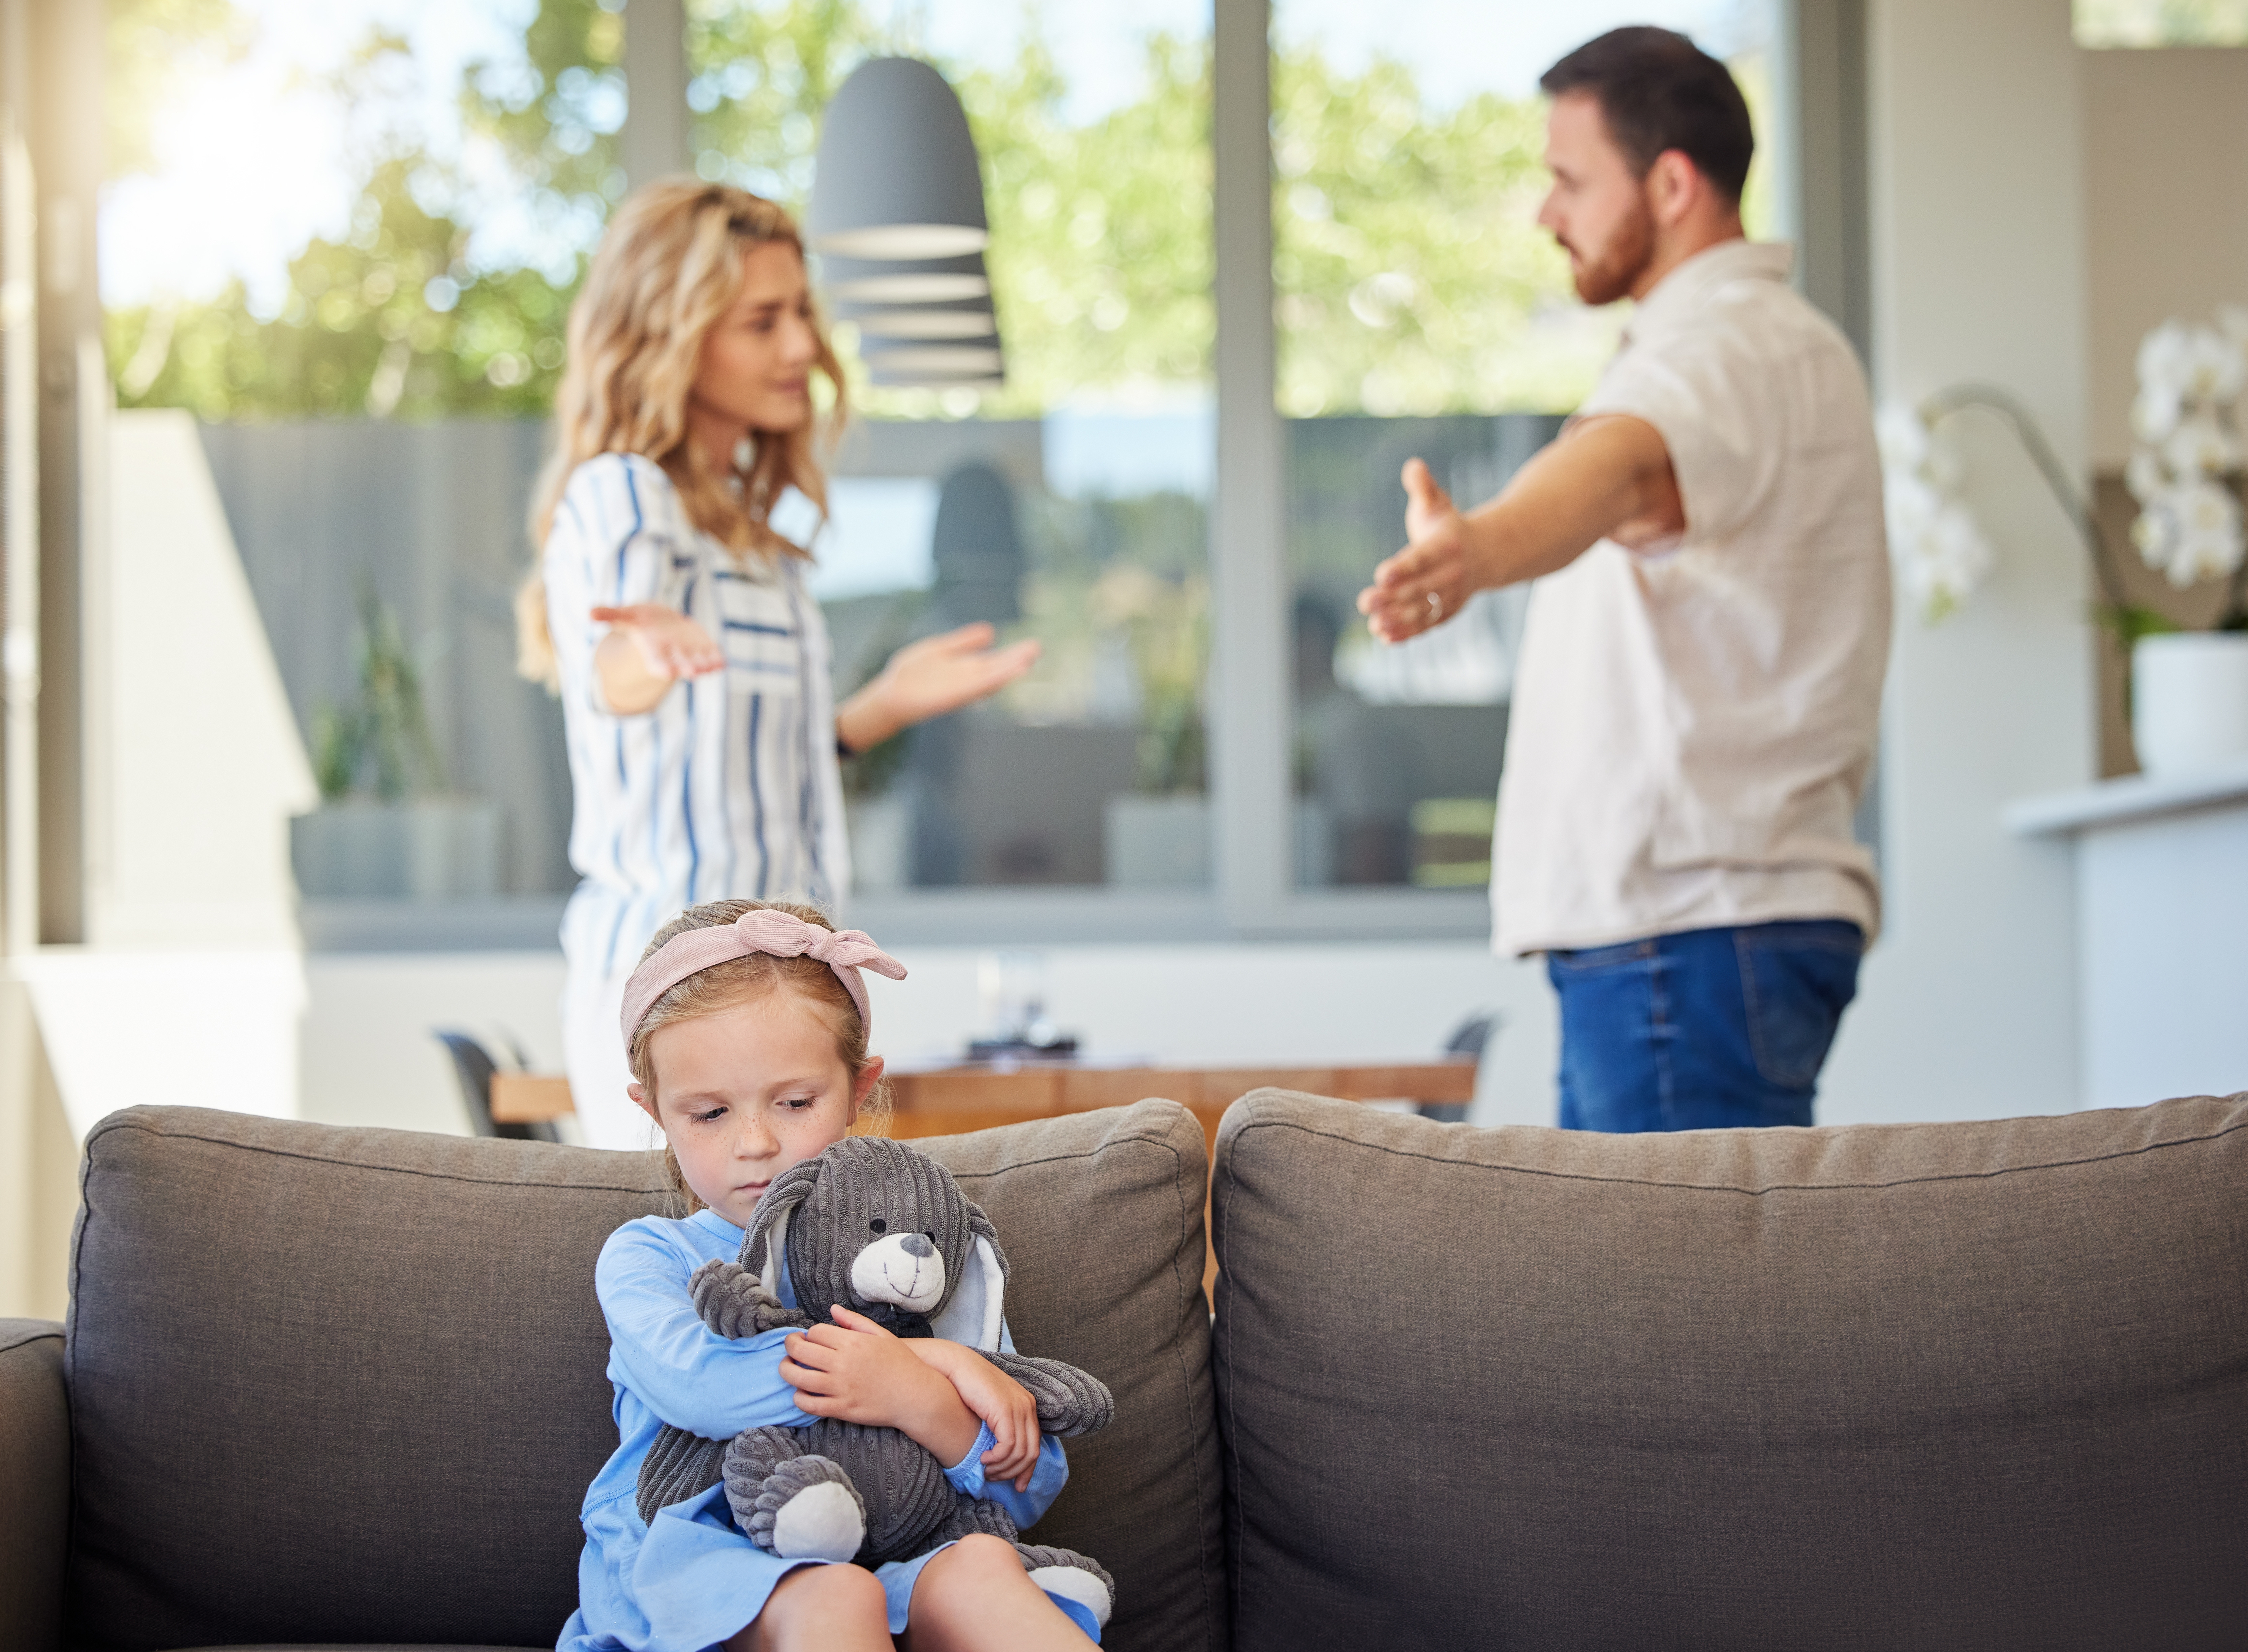 A couple arguing in front of their little girl | Source: Shutterstock